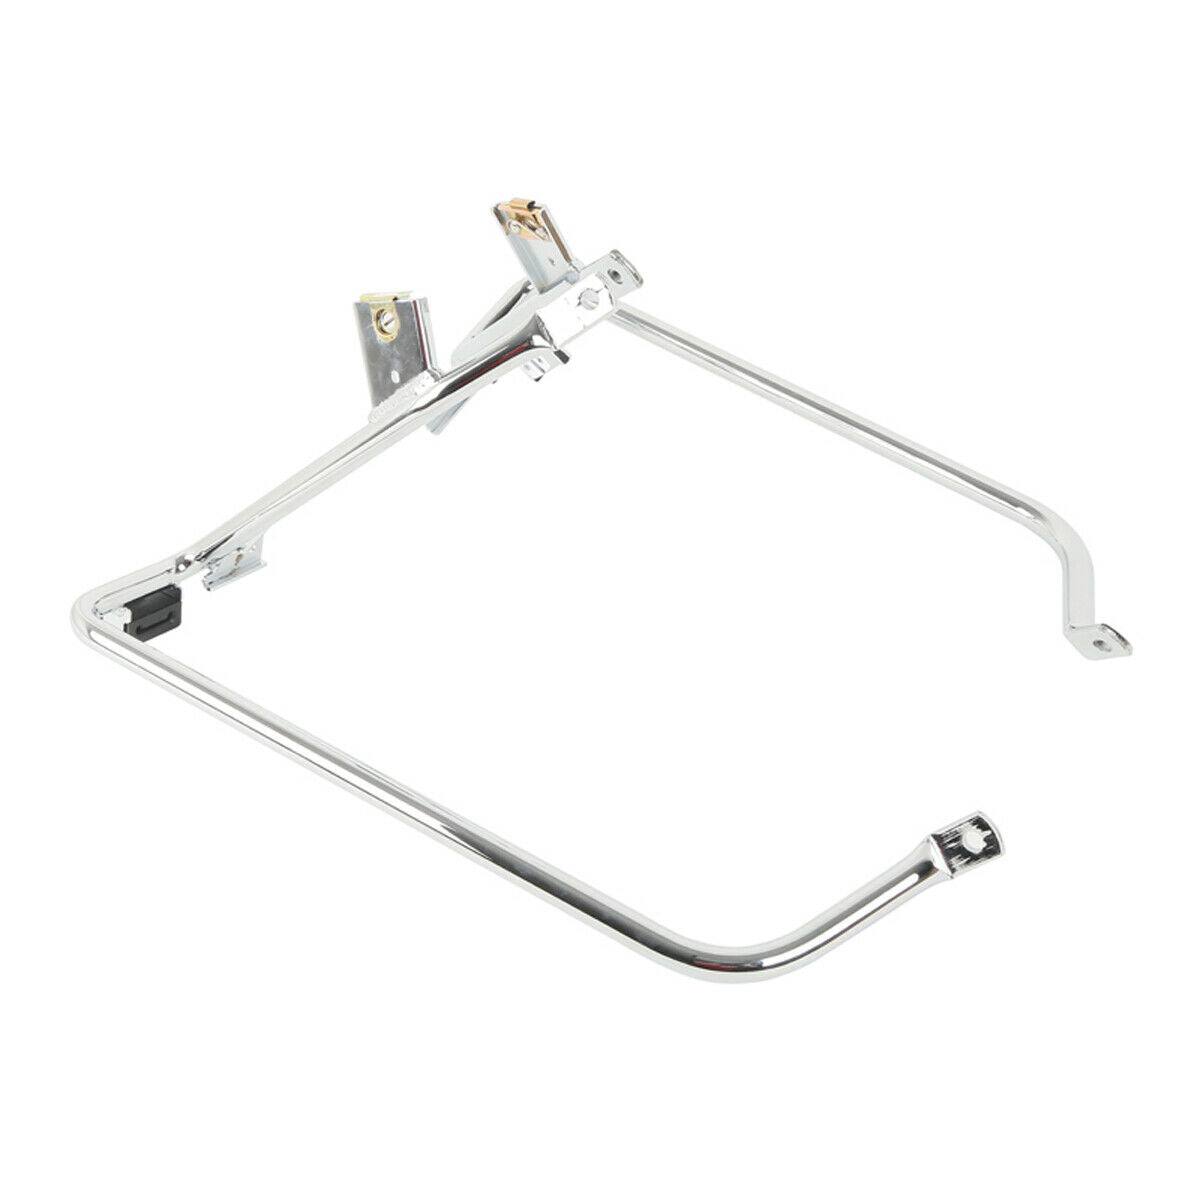 Saddle Bag Support Brackets Fit For Harley Touring Electra Street Glide 2009-13 - Moto Life Products